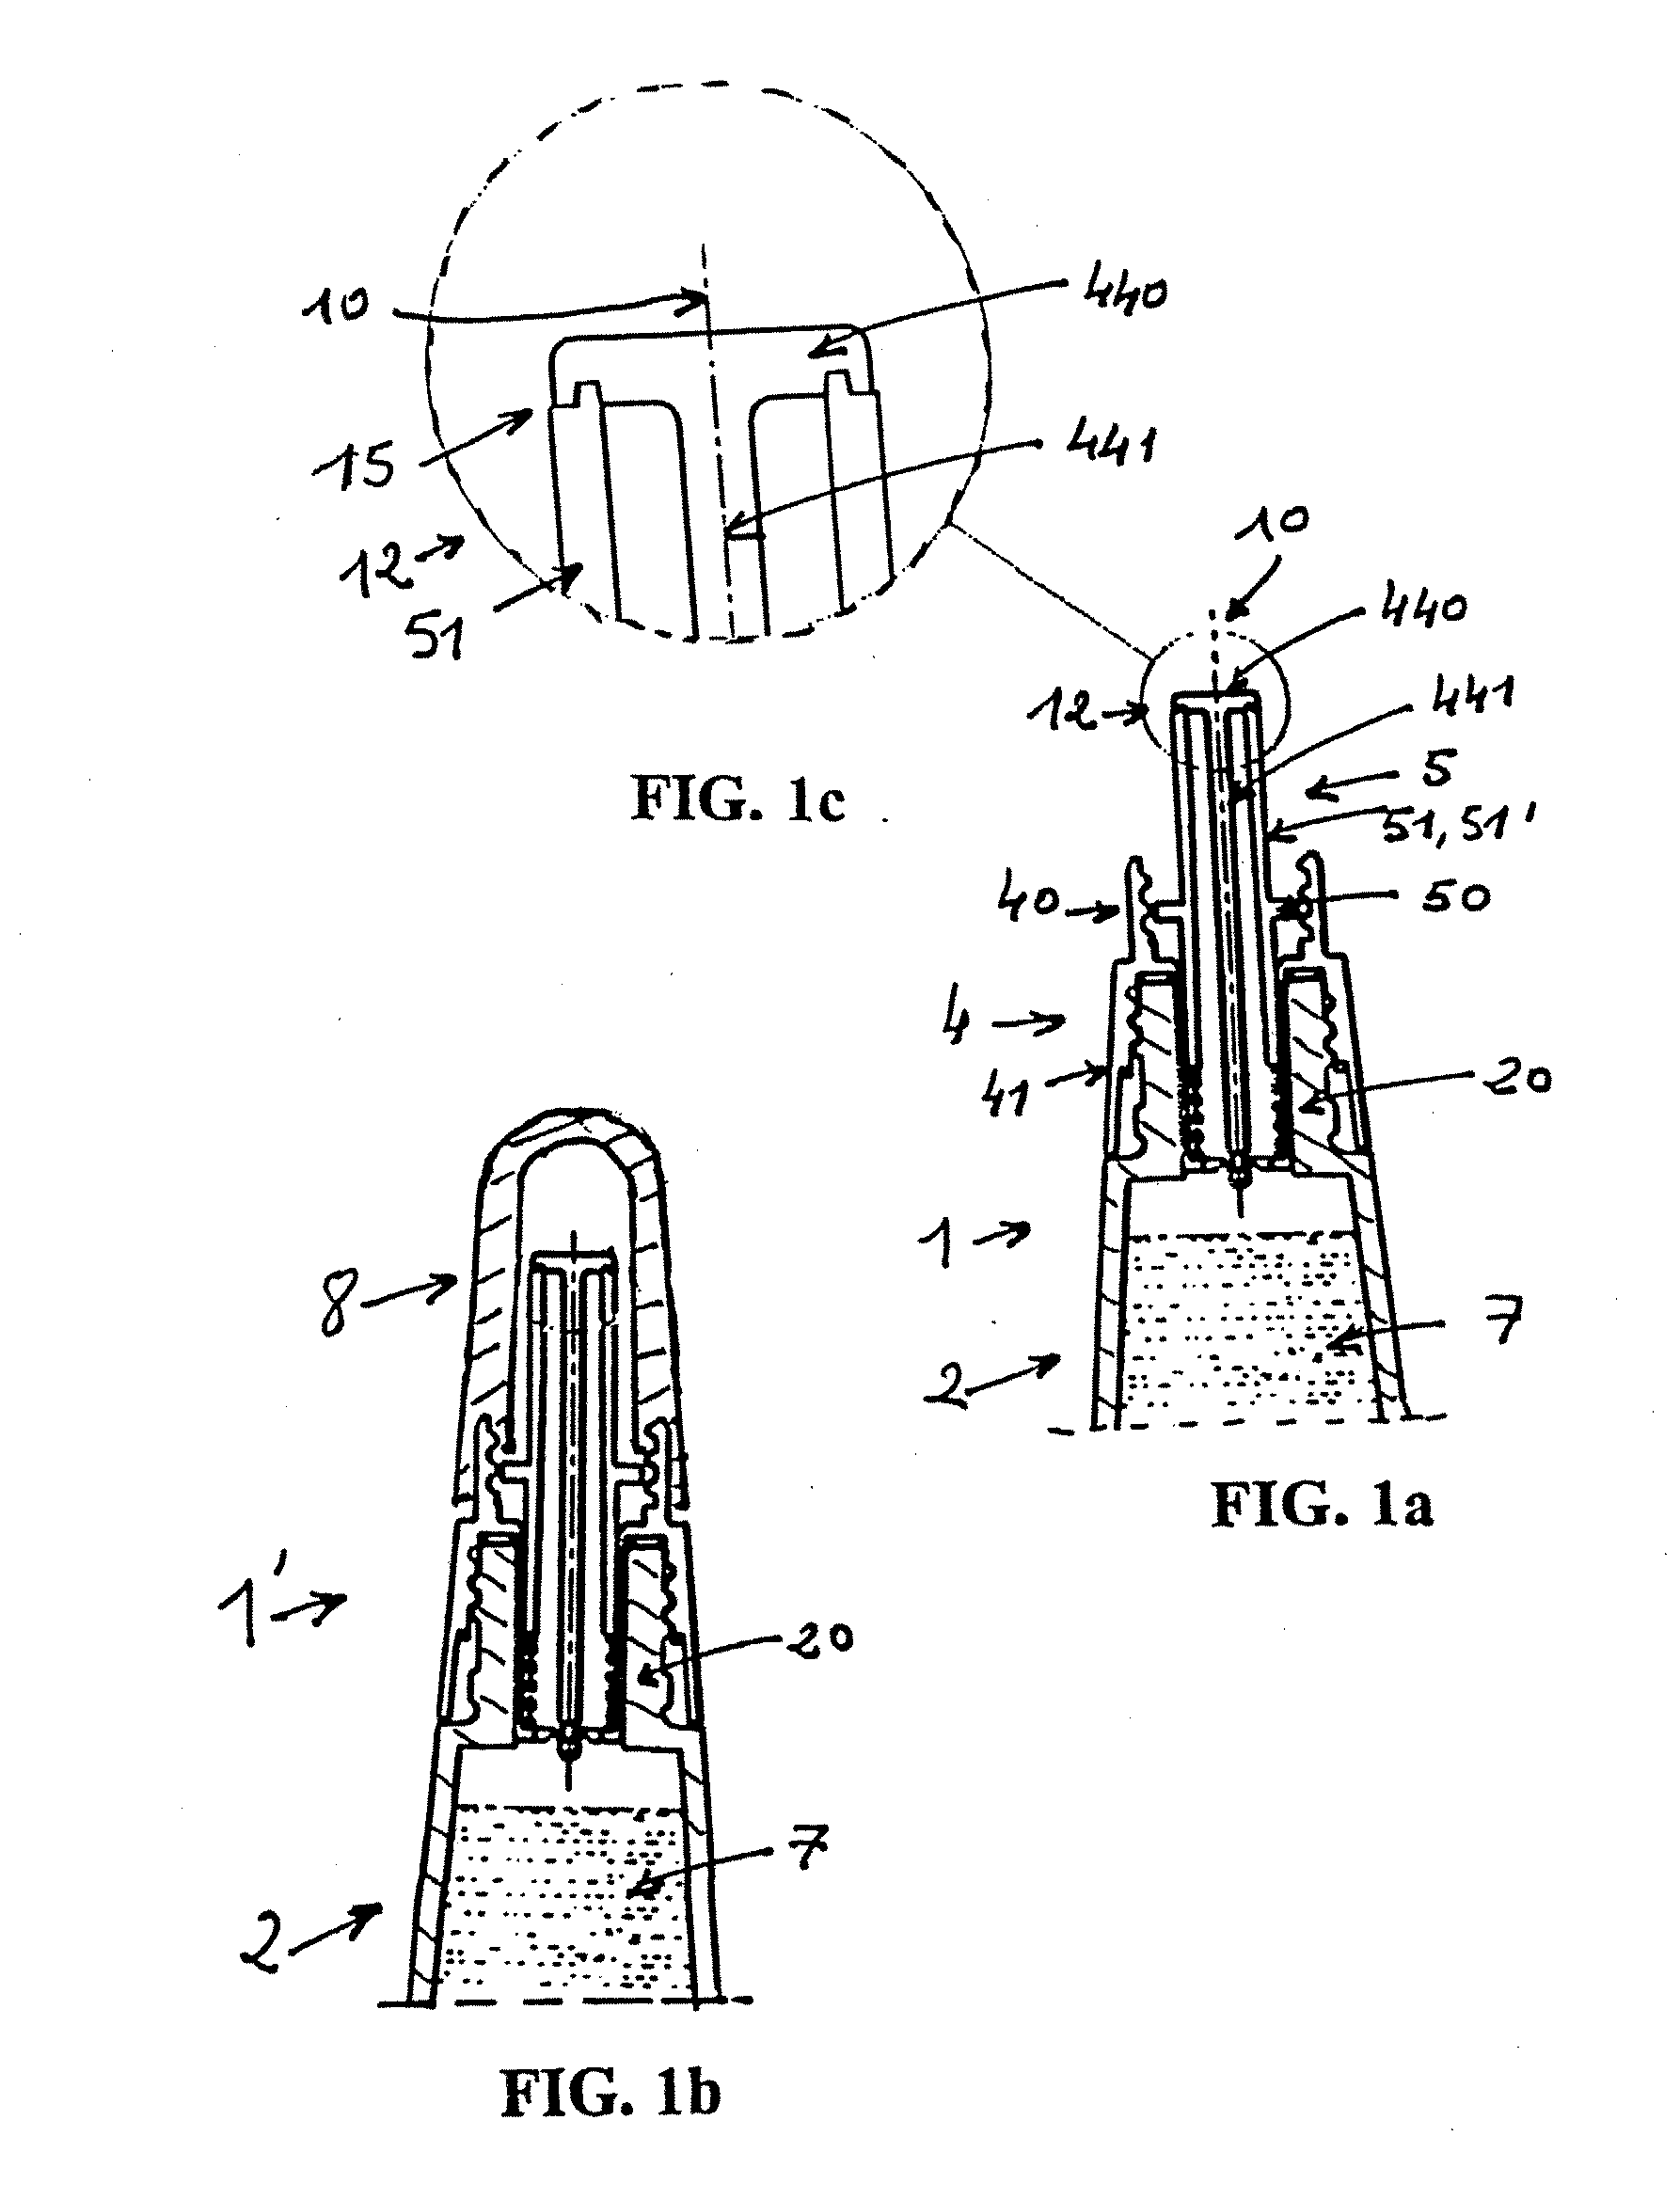 Refill device for dispensing a cosmetic product